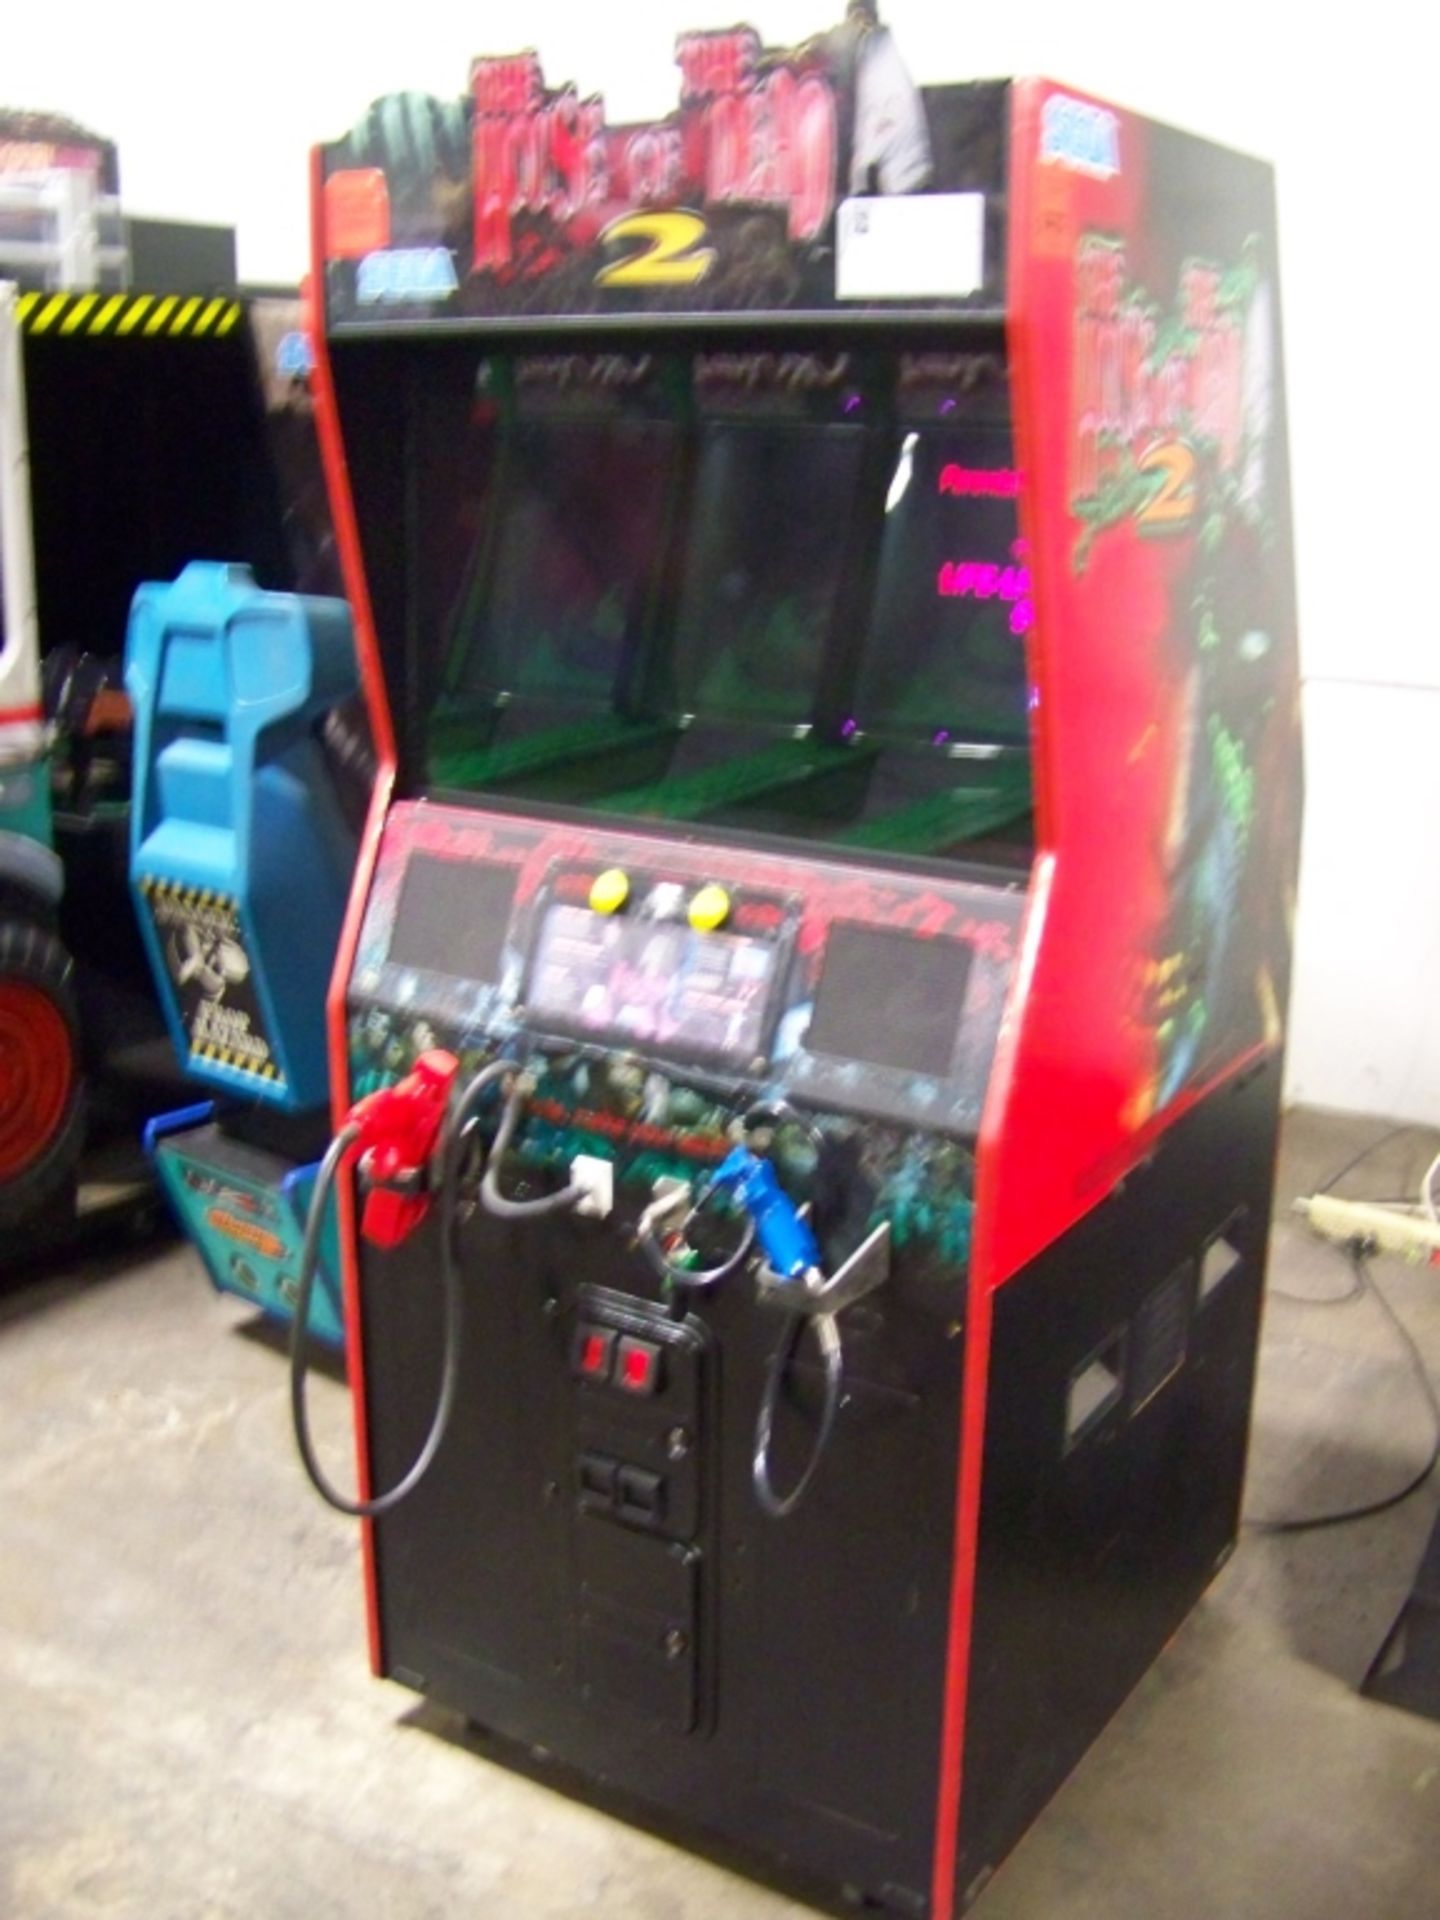 HOUSE OF THE DEAD 2 ZOMBIE SHOOTER ARCADE GAME - Image 4 of 5